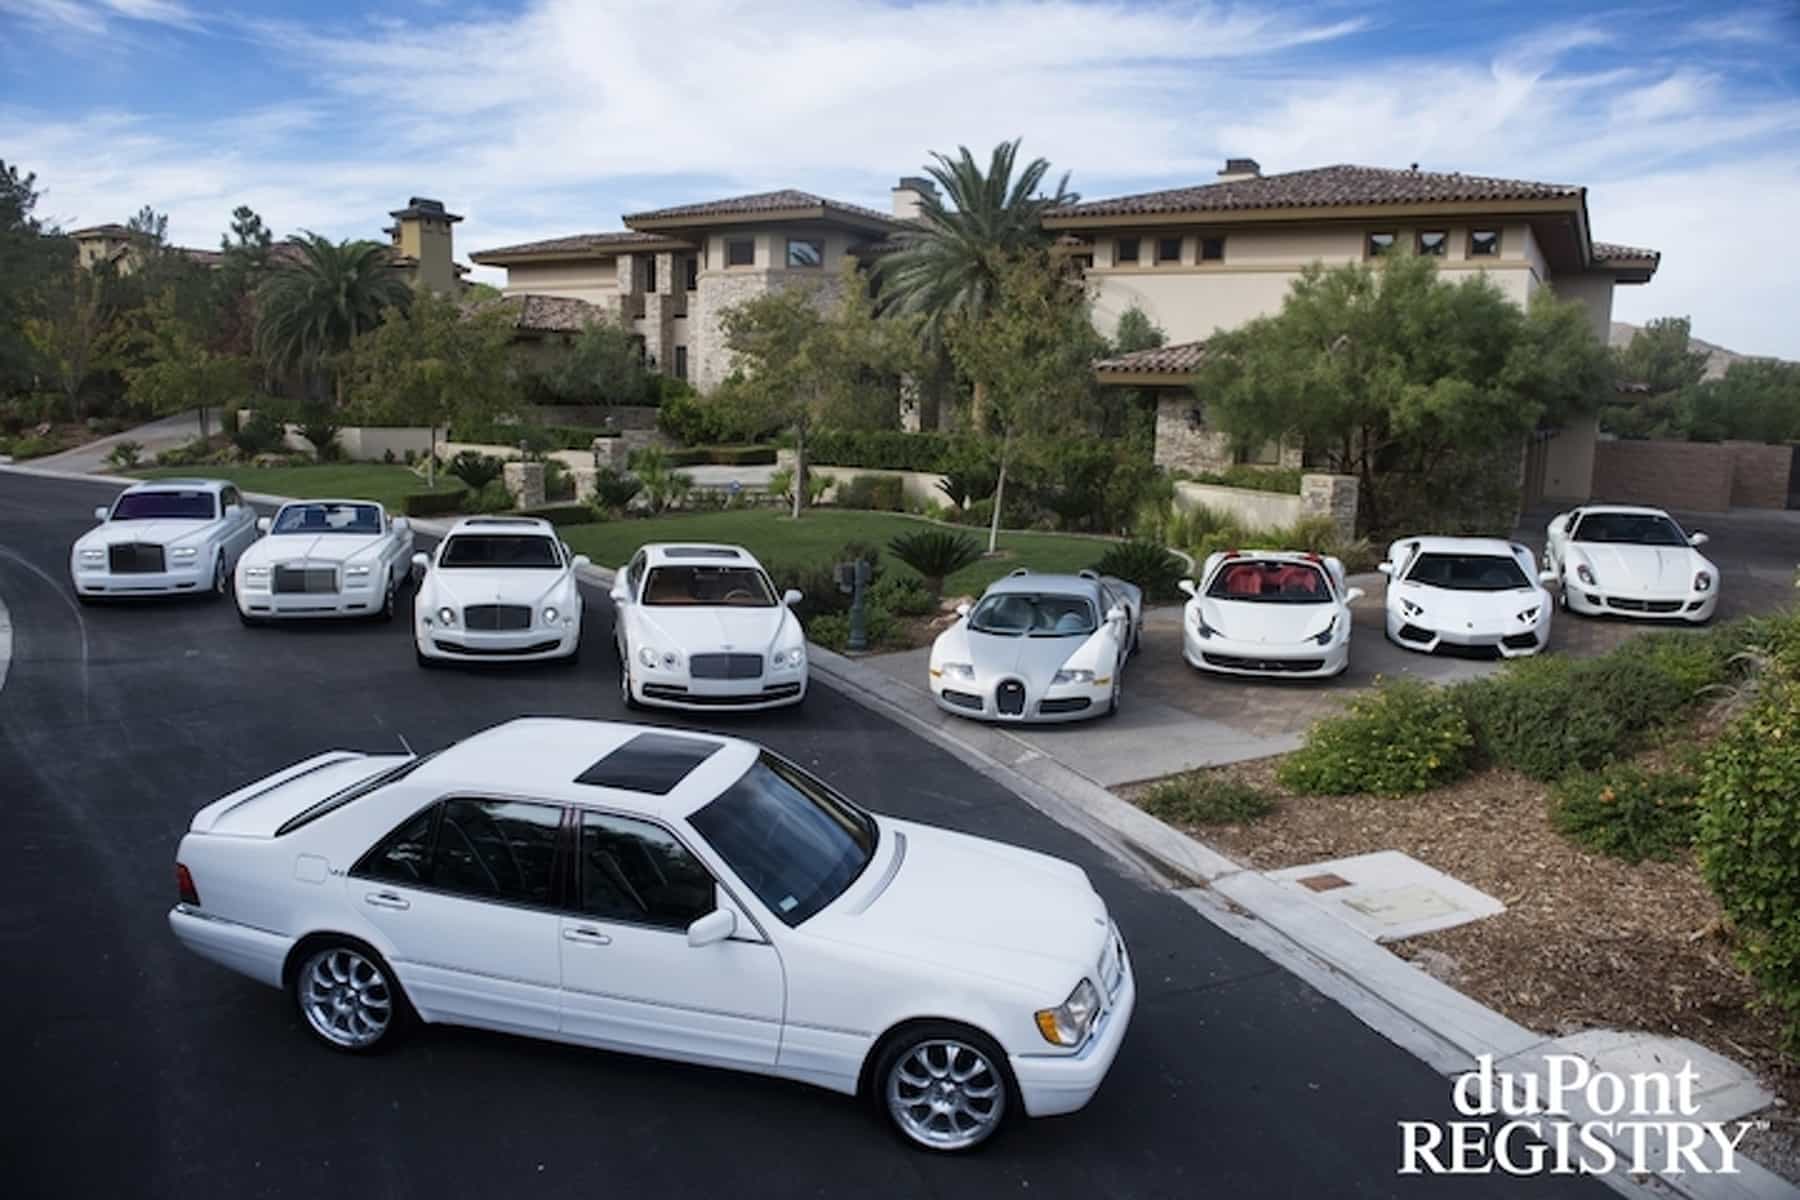 Floyd Mayweather car collection